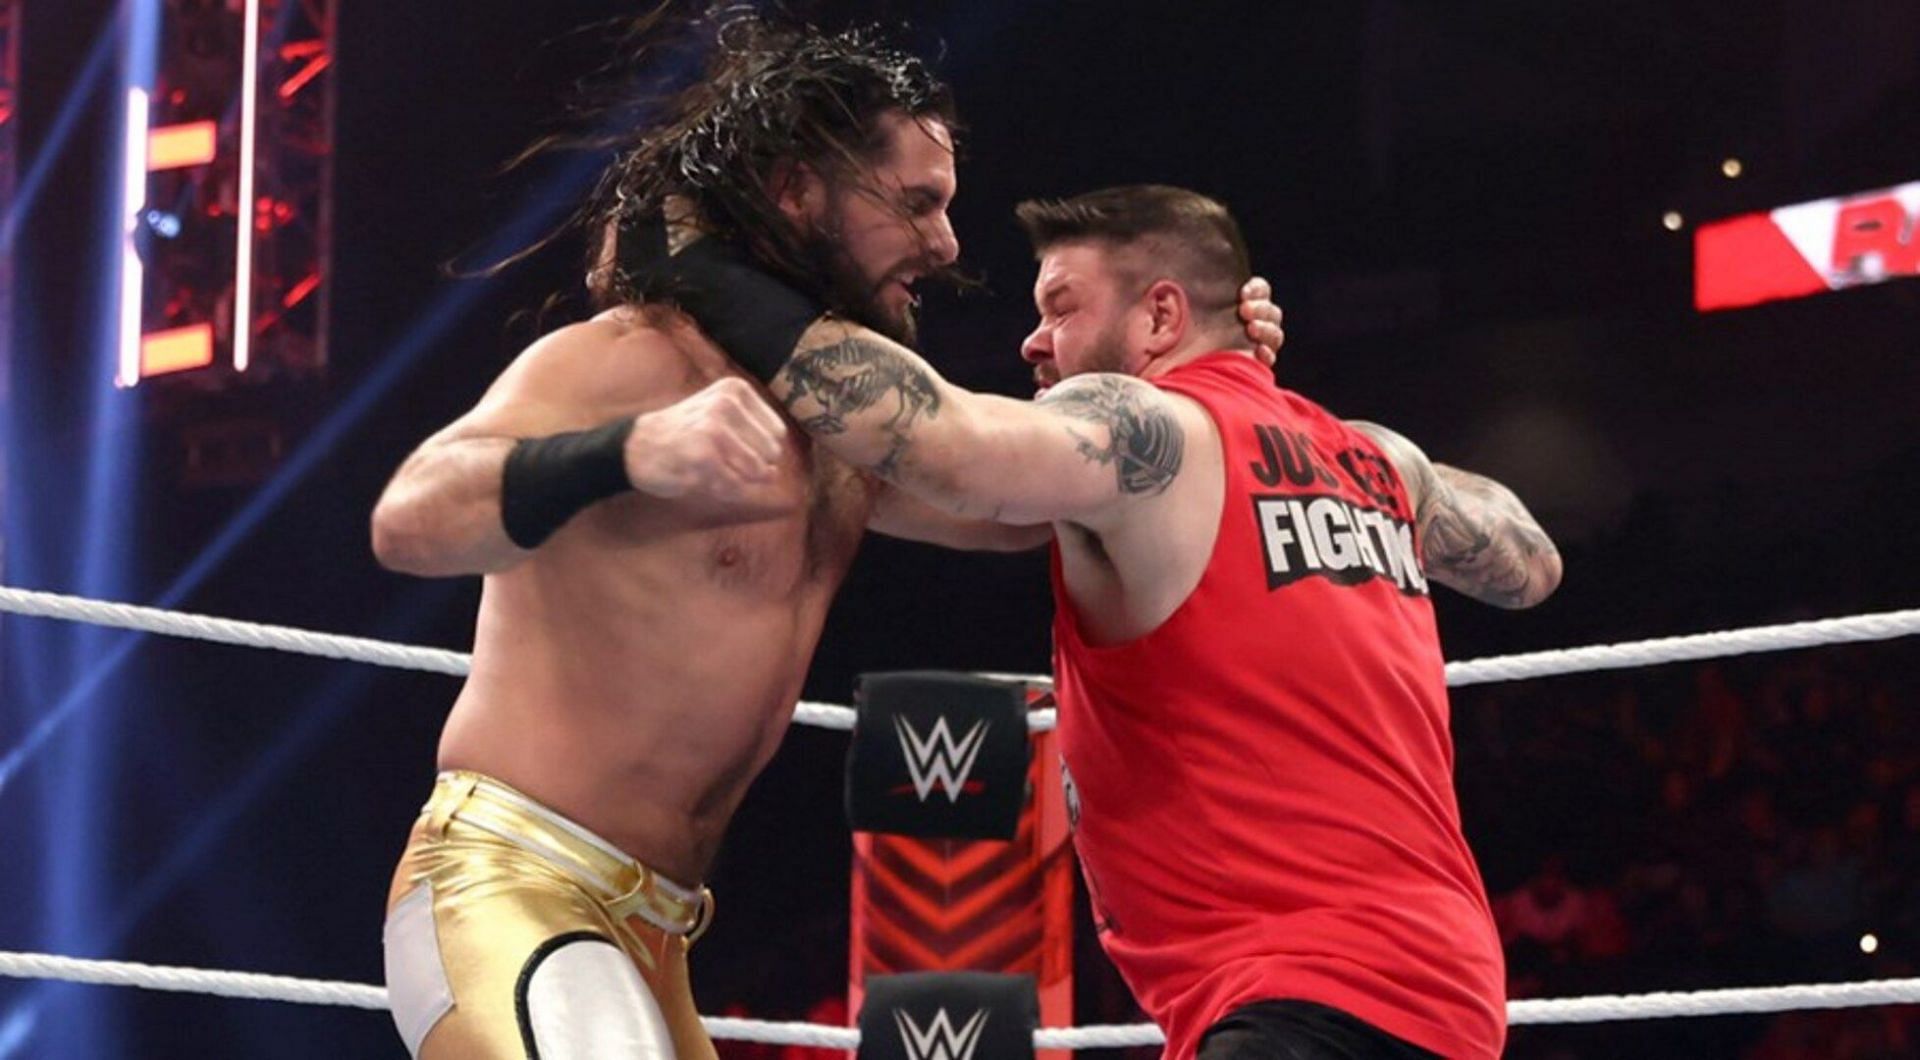 Seth Rollins and Kevin Owens exchanging blows.